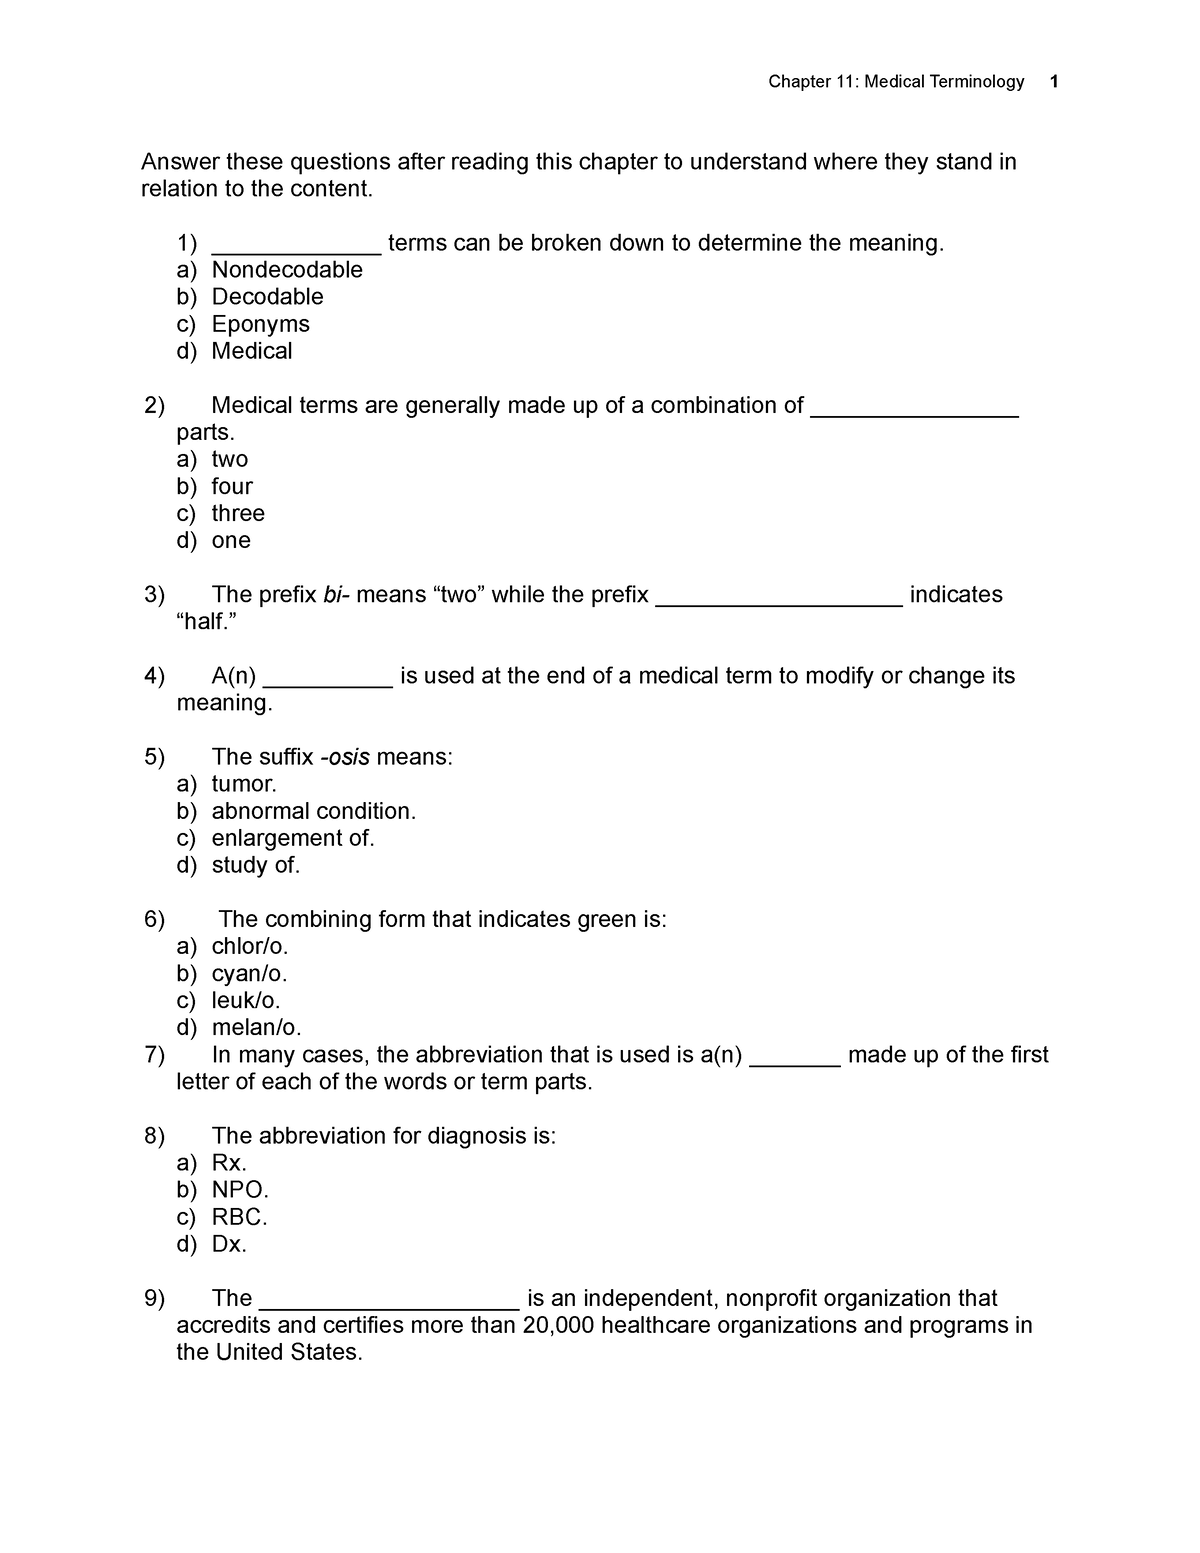 chapter 11 medical terminology homework answers